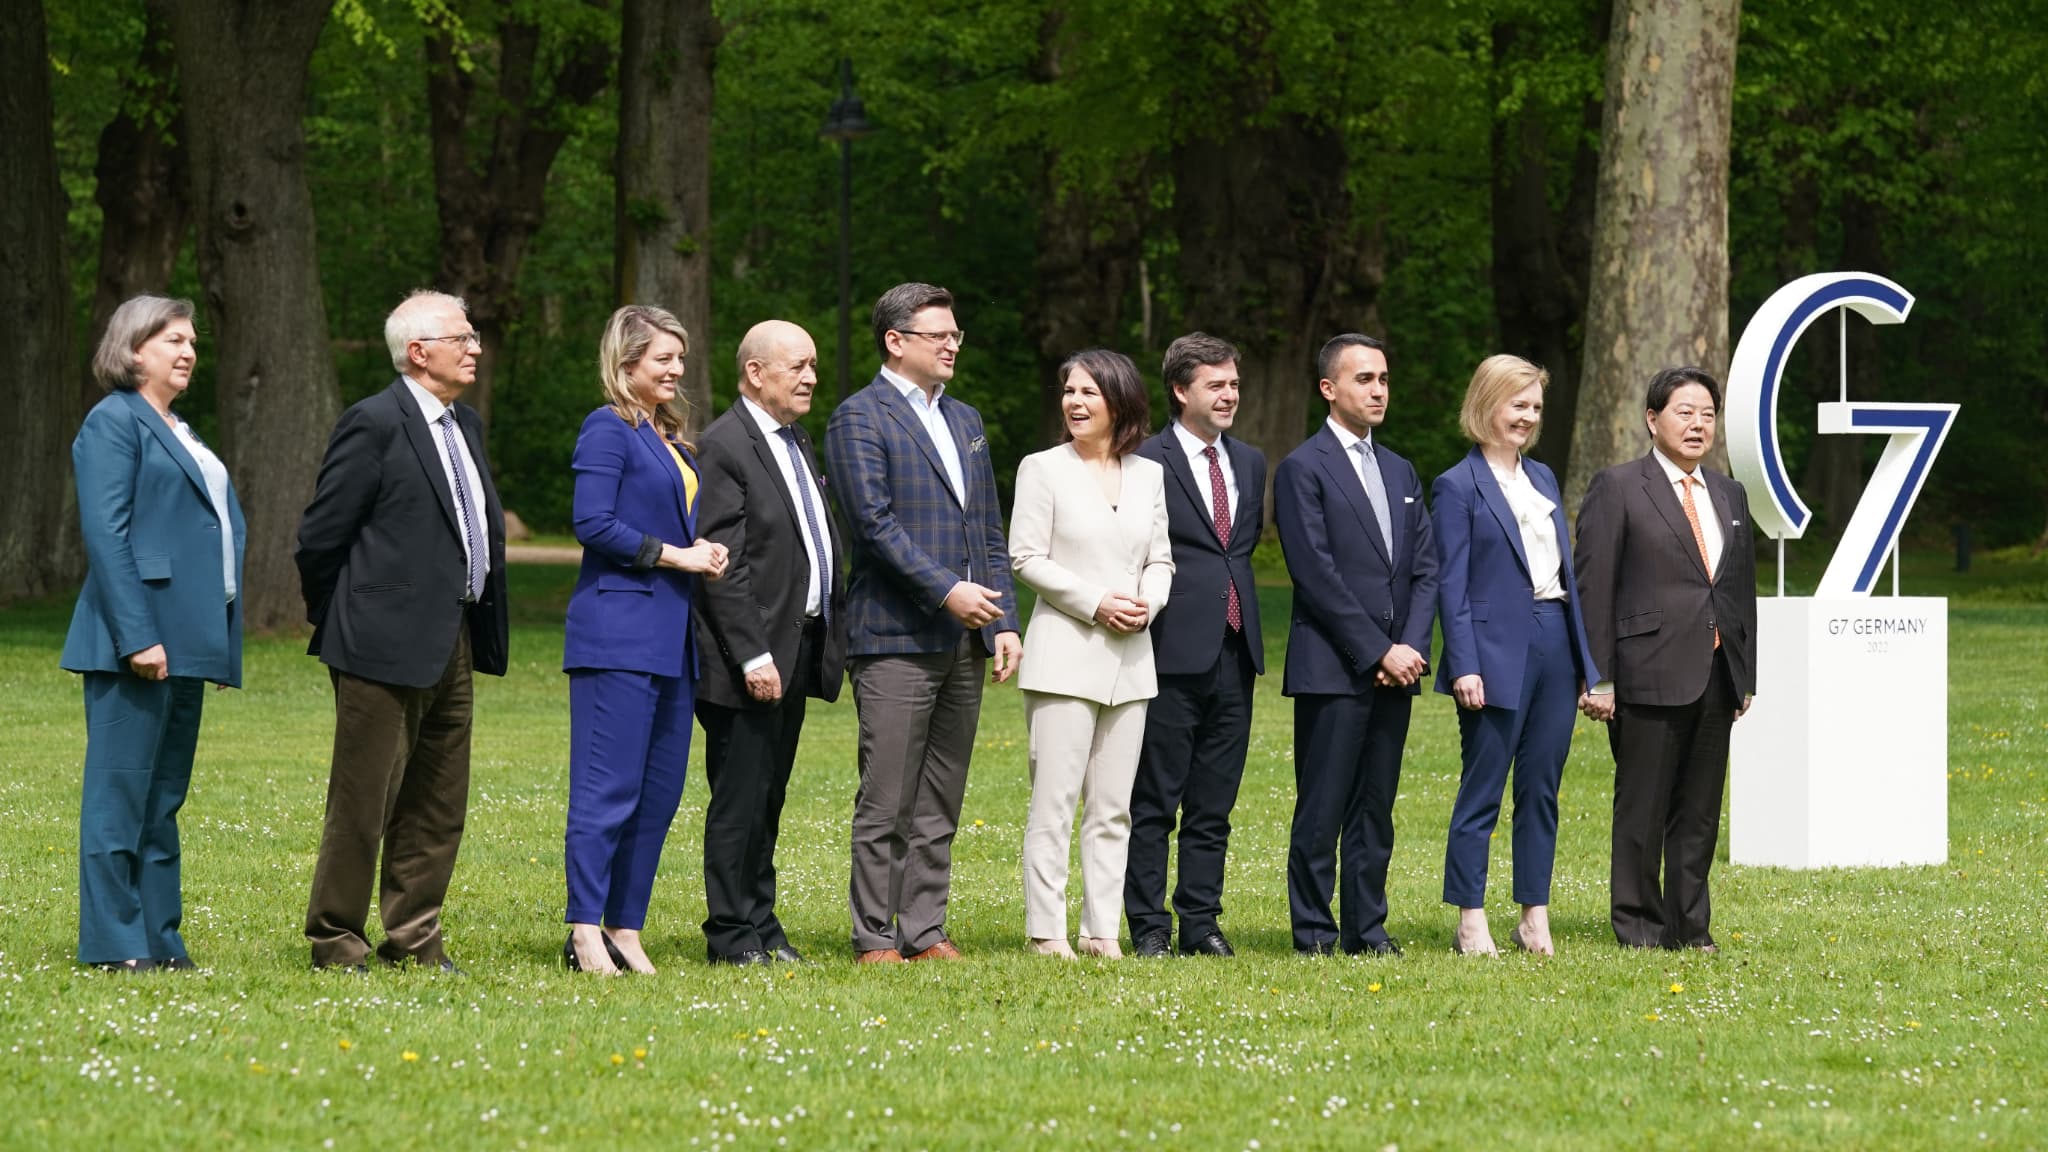 Live – Ukraine: G7 “does not recognize borders” Russia wants to impose